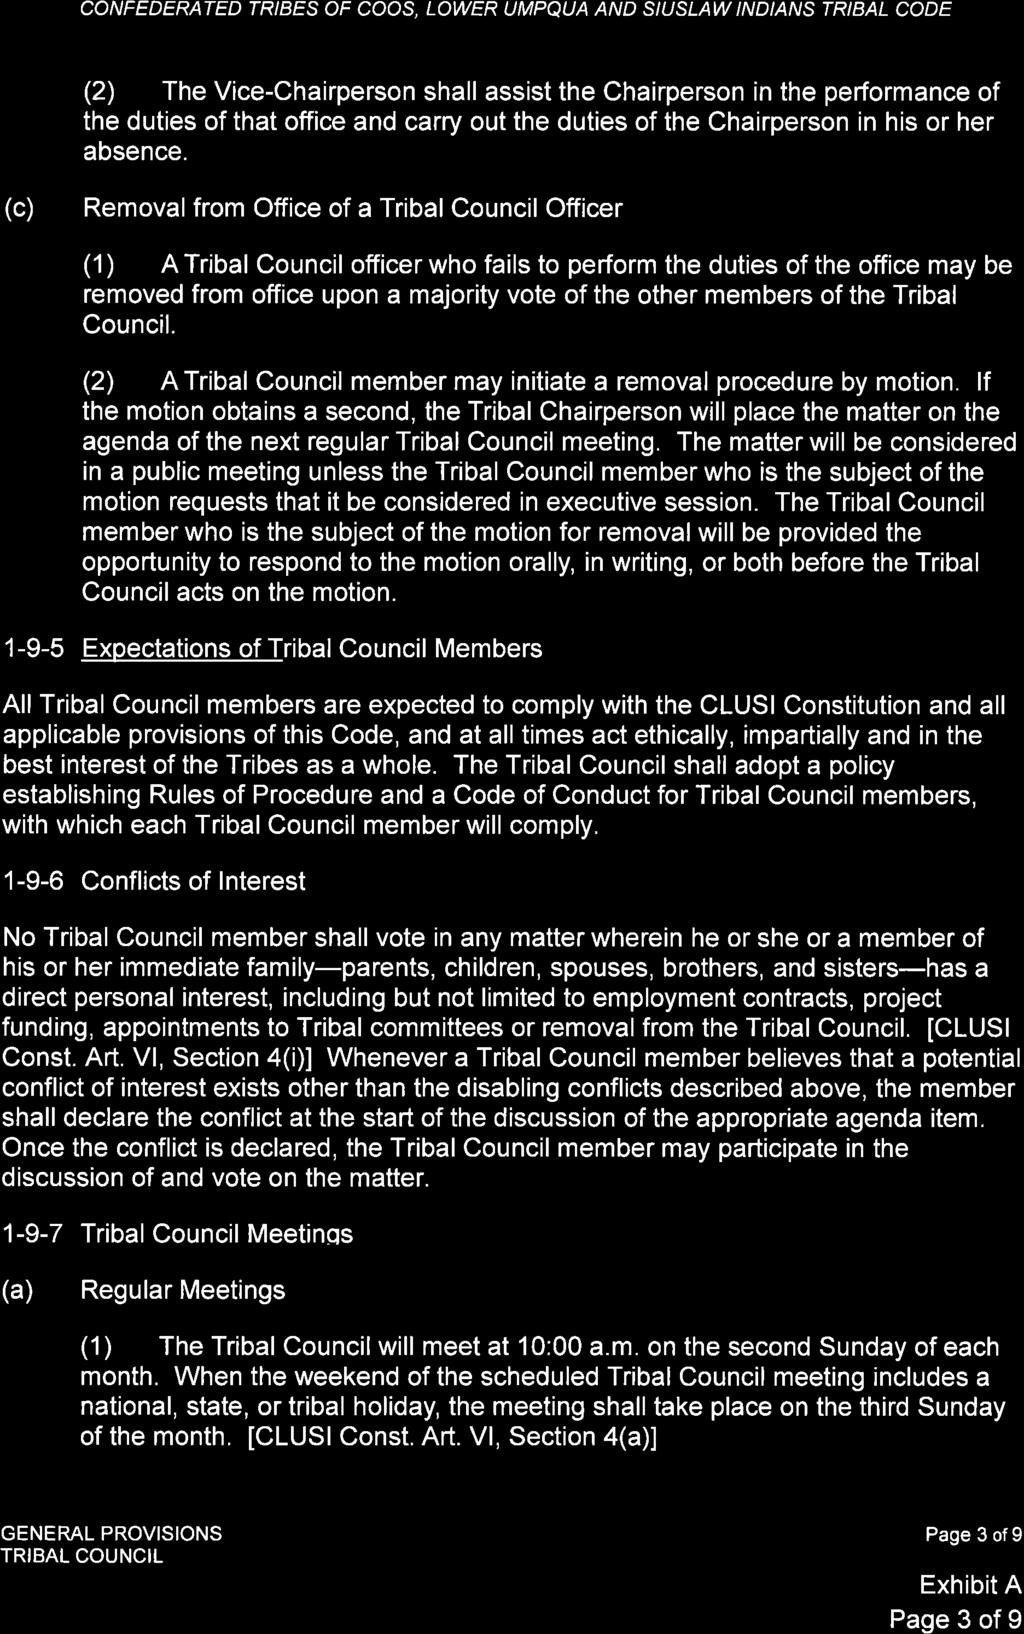 CONFEDERATED TRIBES OF COOS, LOWER UMPQUA AND S/USIAW INDIANS TRIBAL CODE (2) The Vice-Chairperson shall assist the Chairperson in the performance of the duties of that office and carry out the